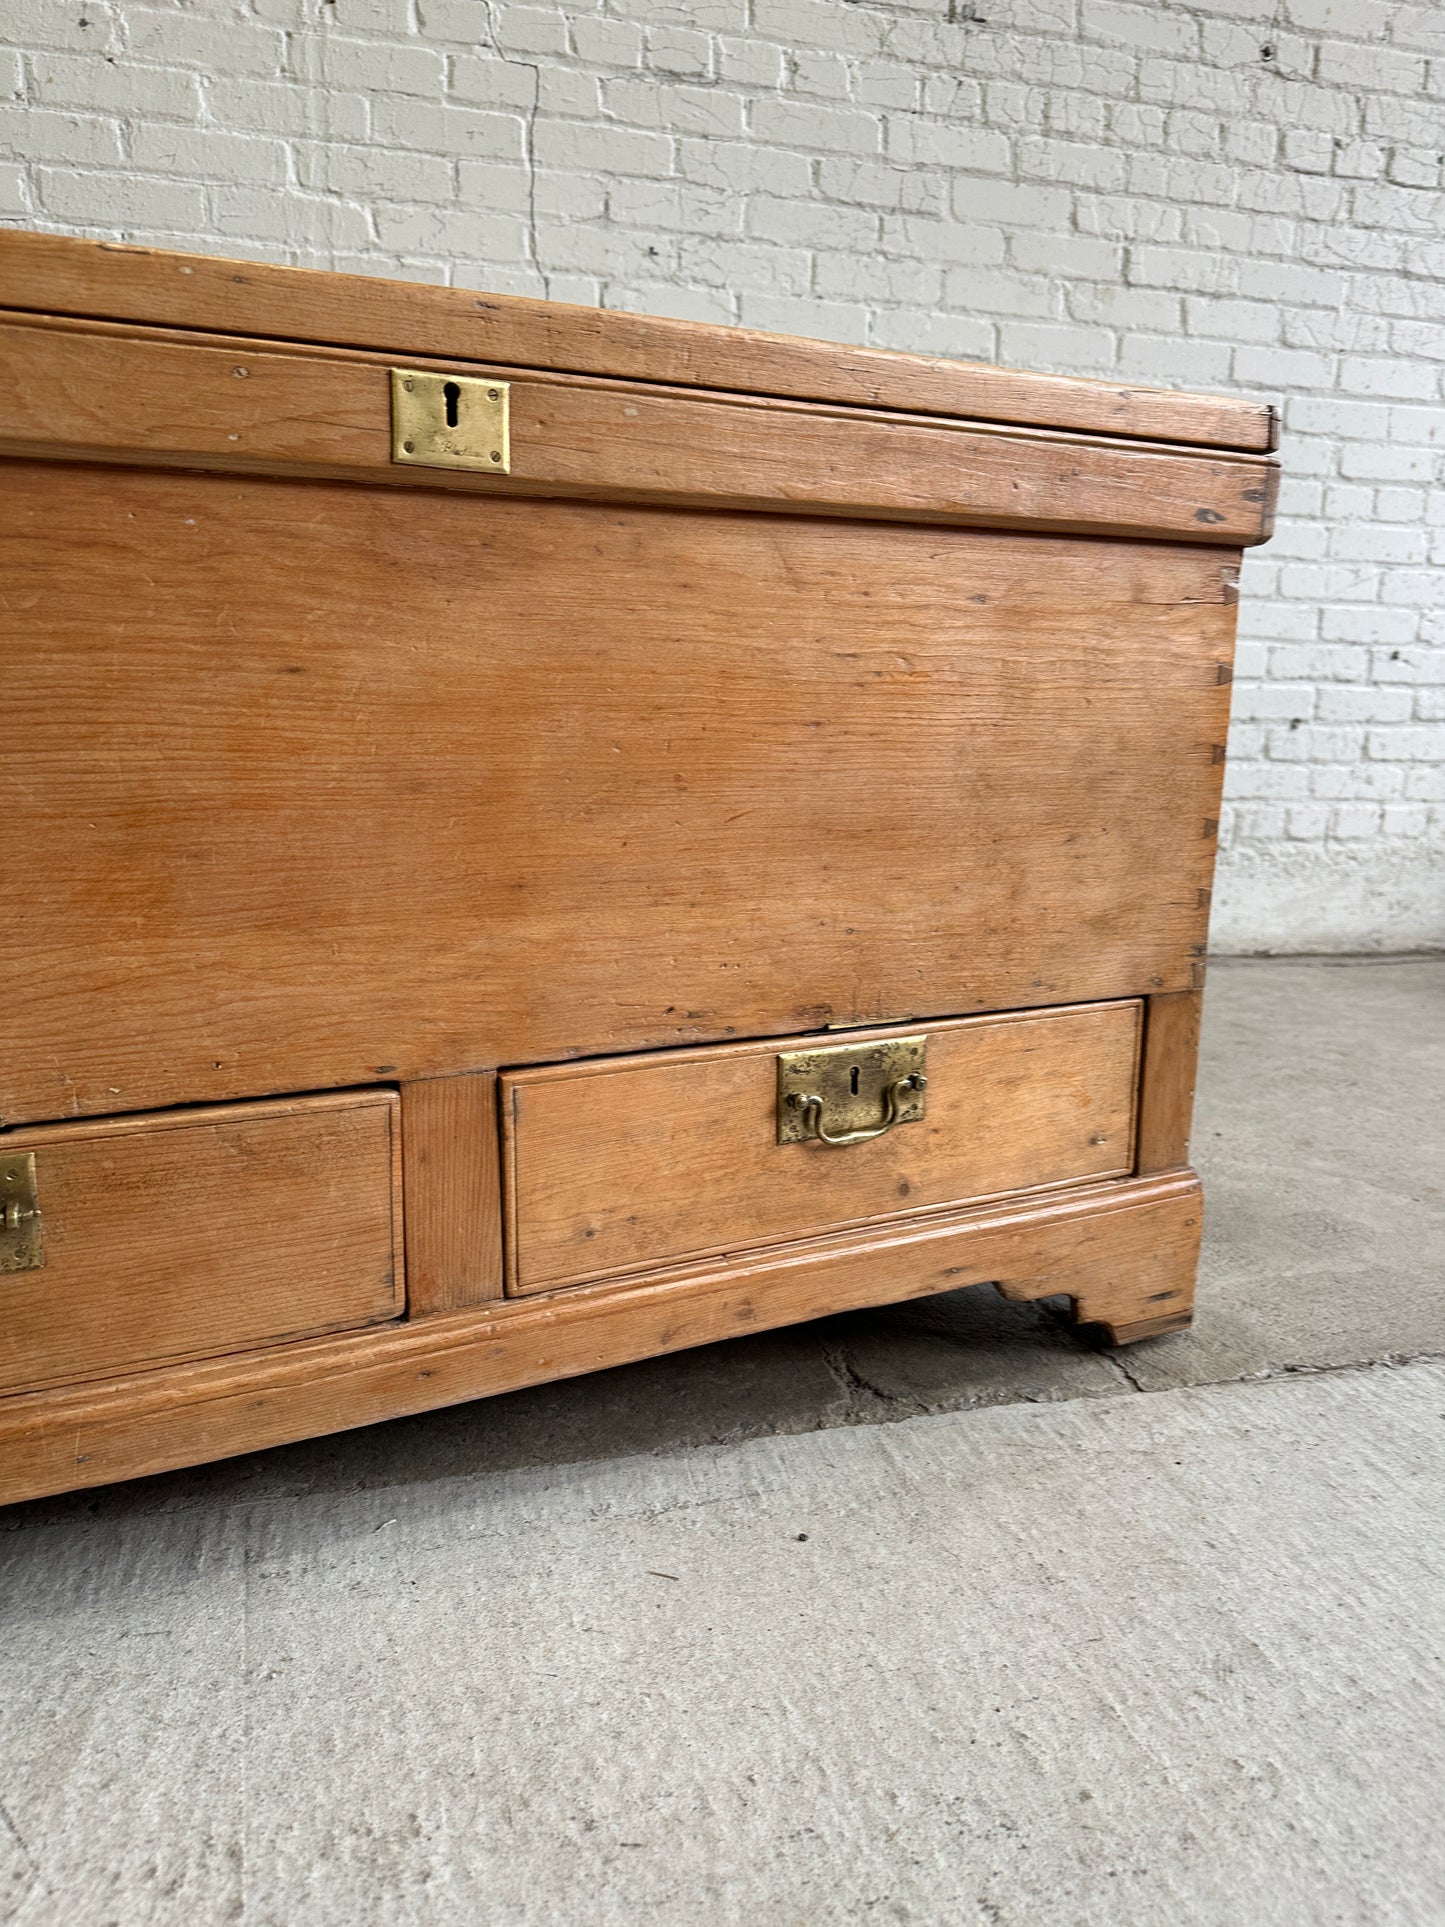 Antique Pine English Mule Chest with Brass Hardware c. 1860